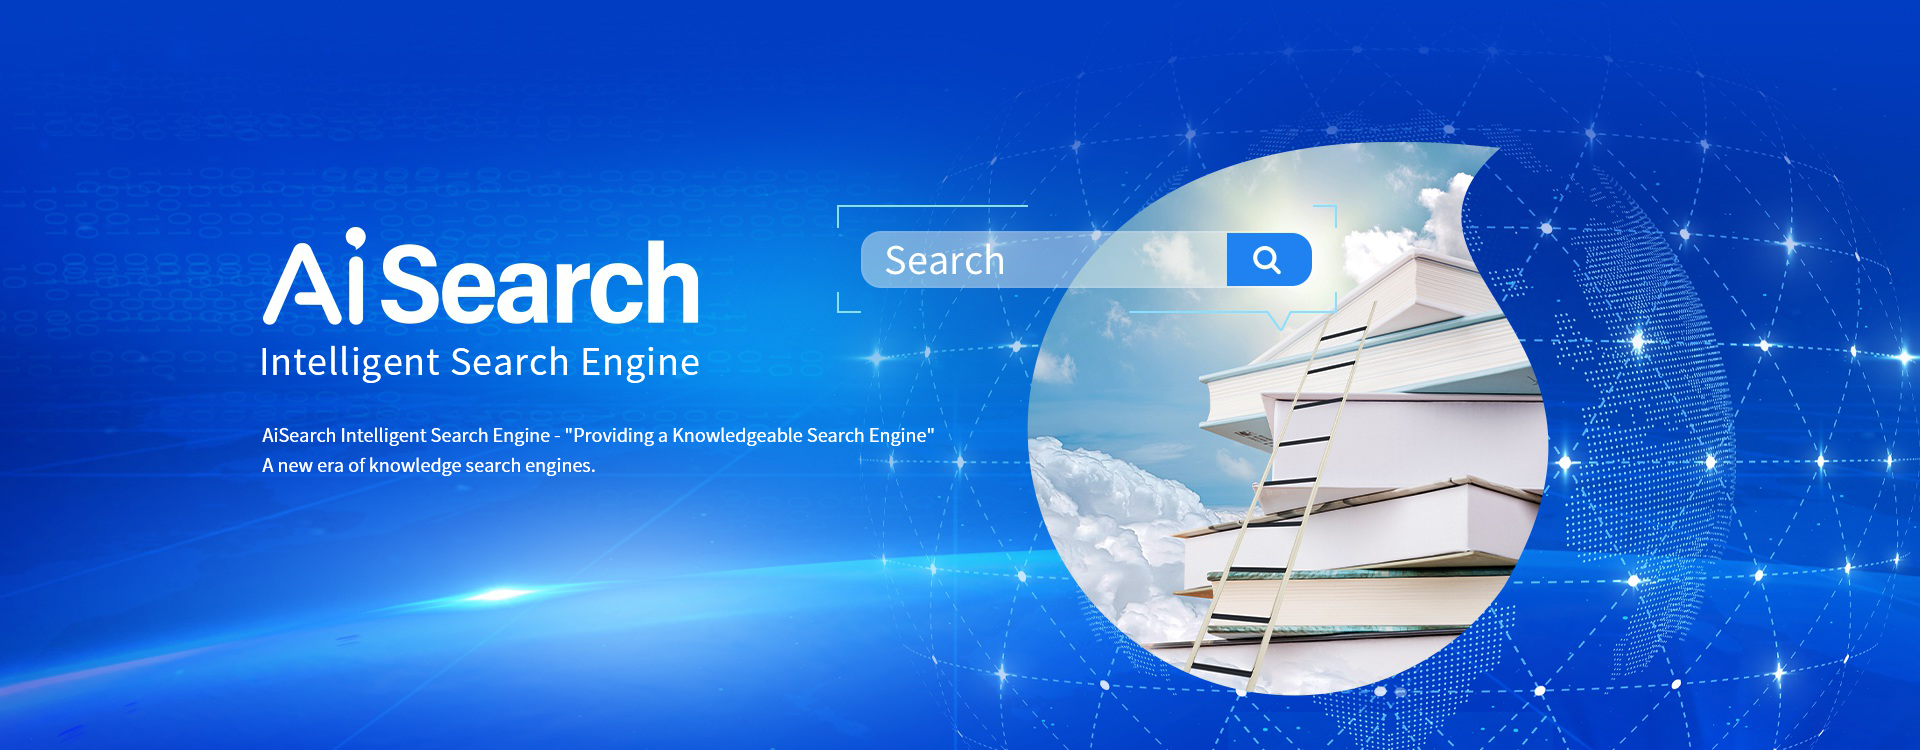 AiSearch Intelligent Search Engine